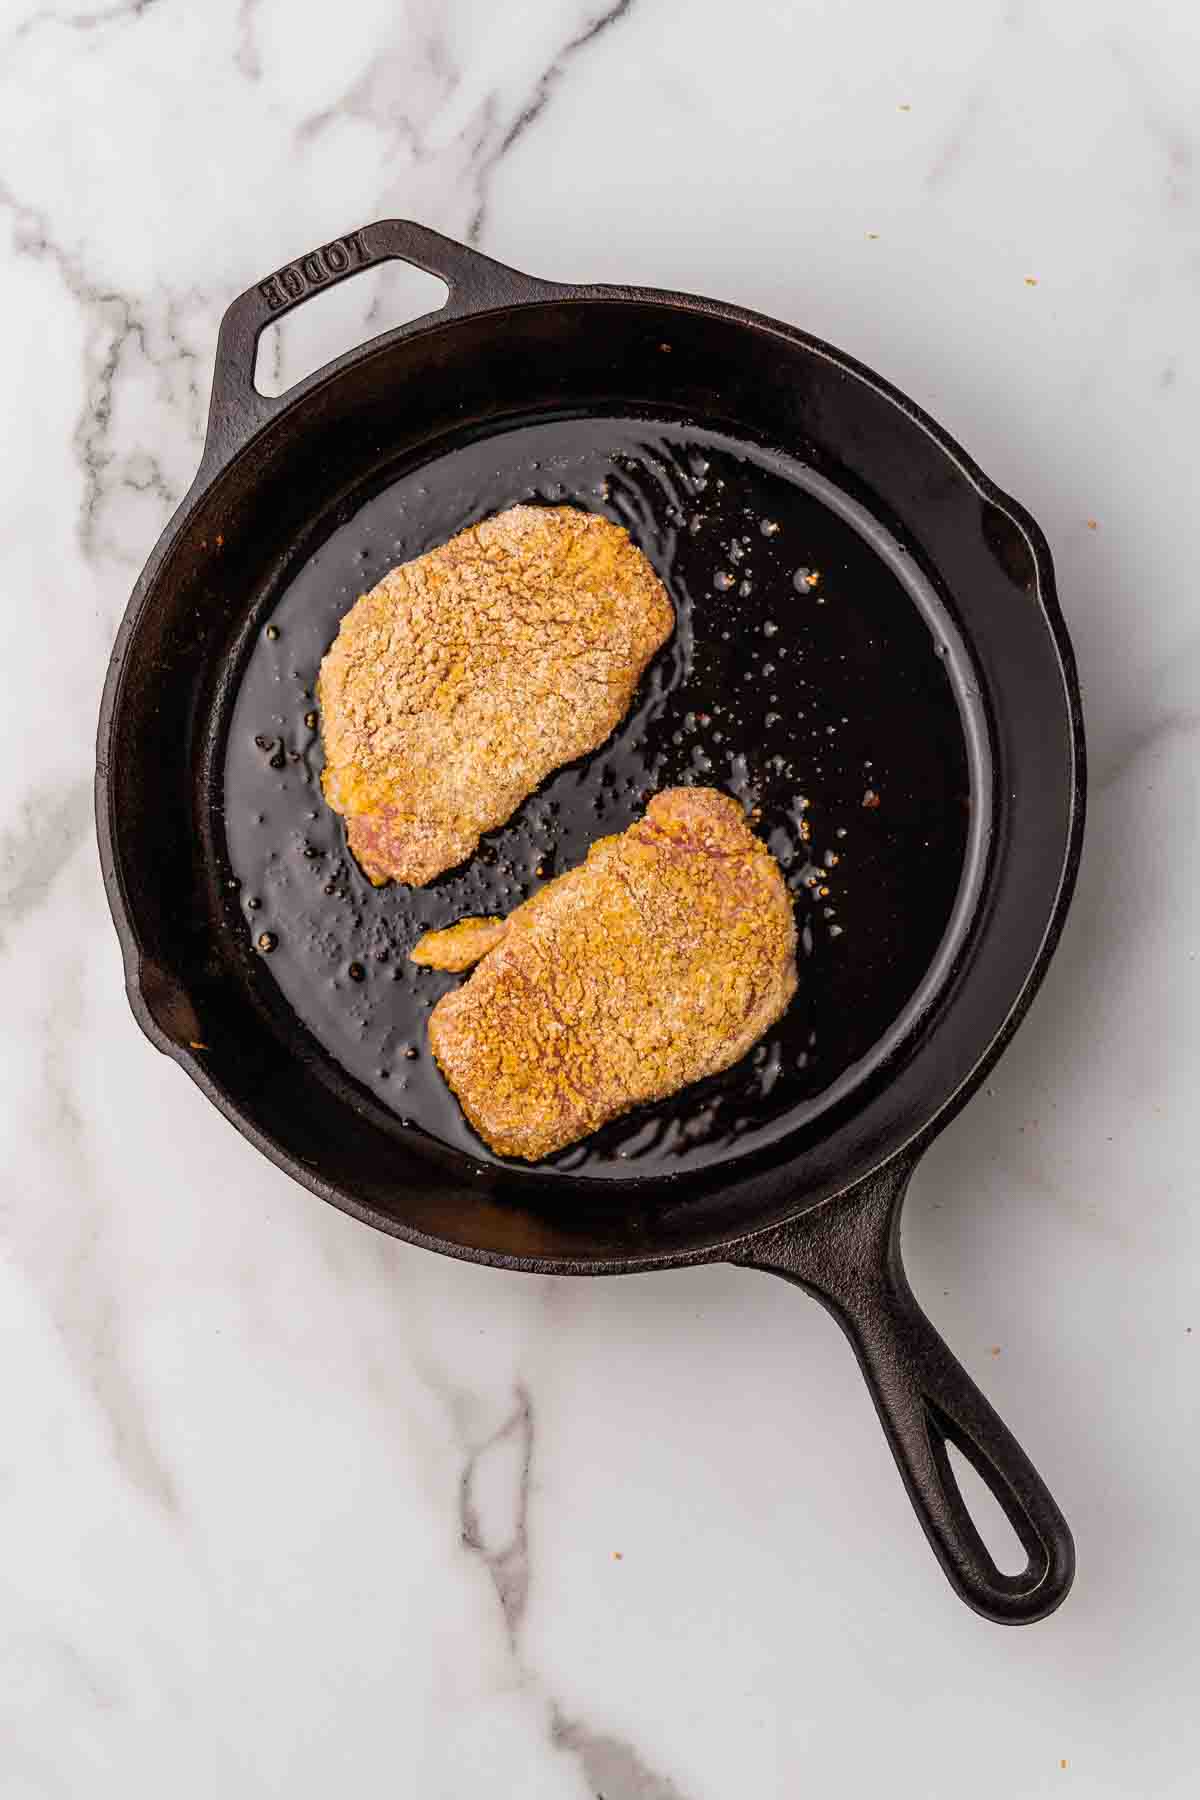 Two pieces of cornmeal-coated chicken in a cast iron skillet.